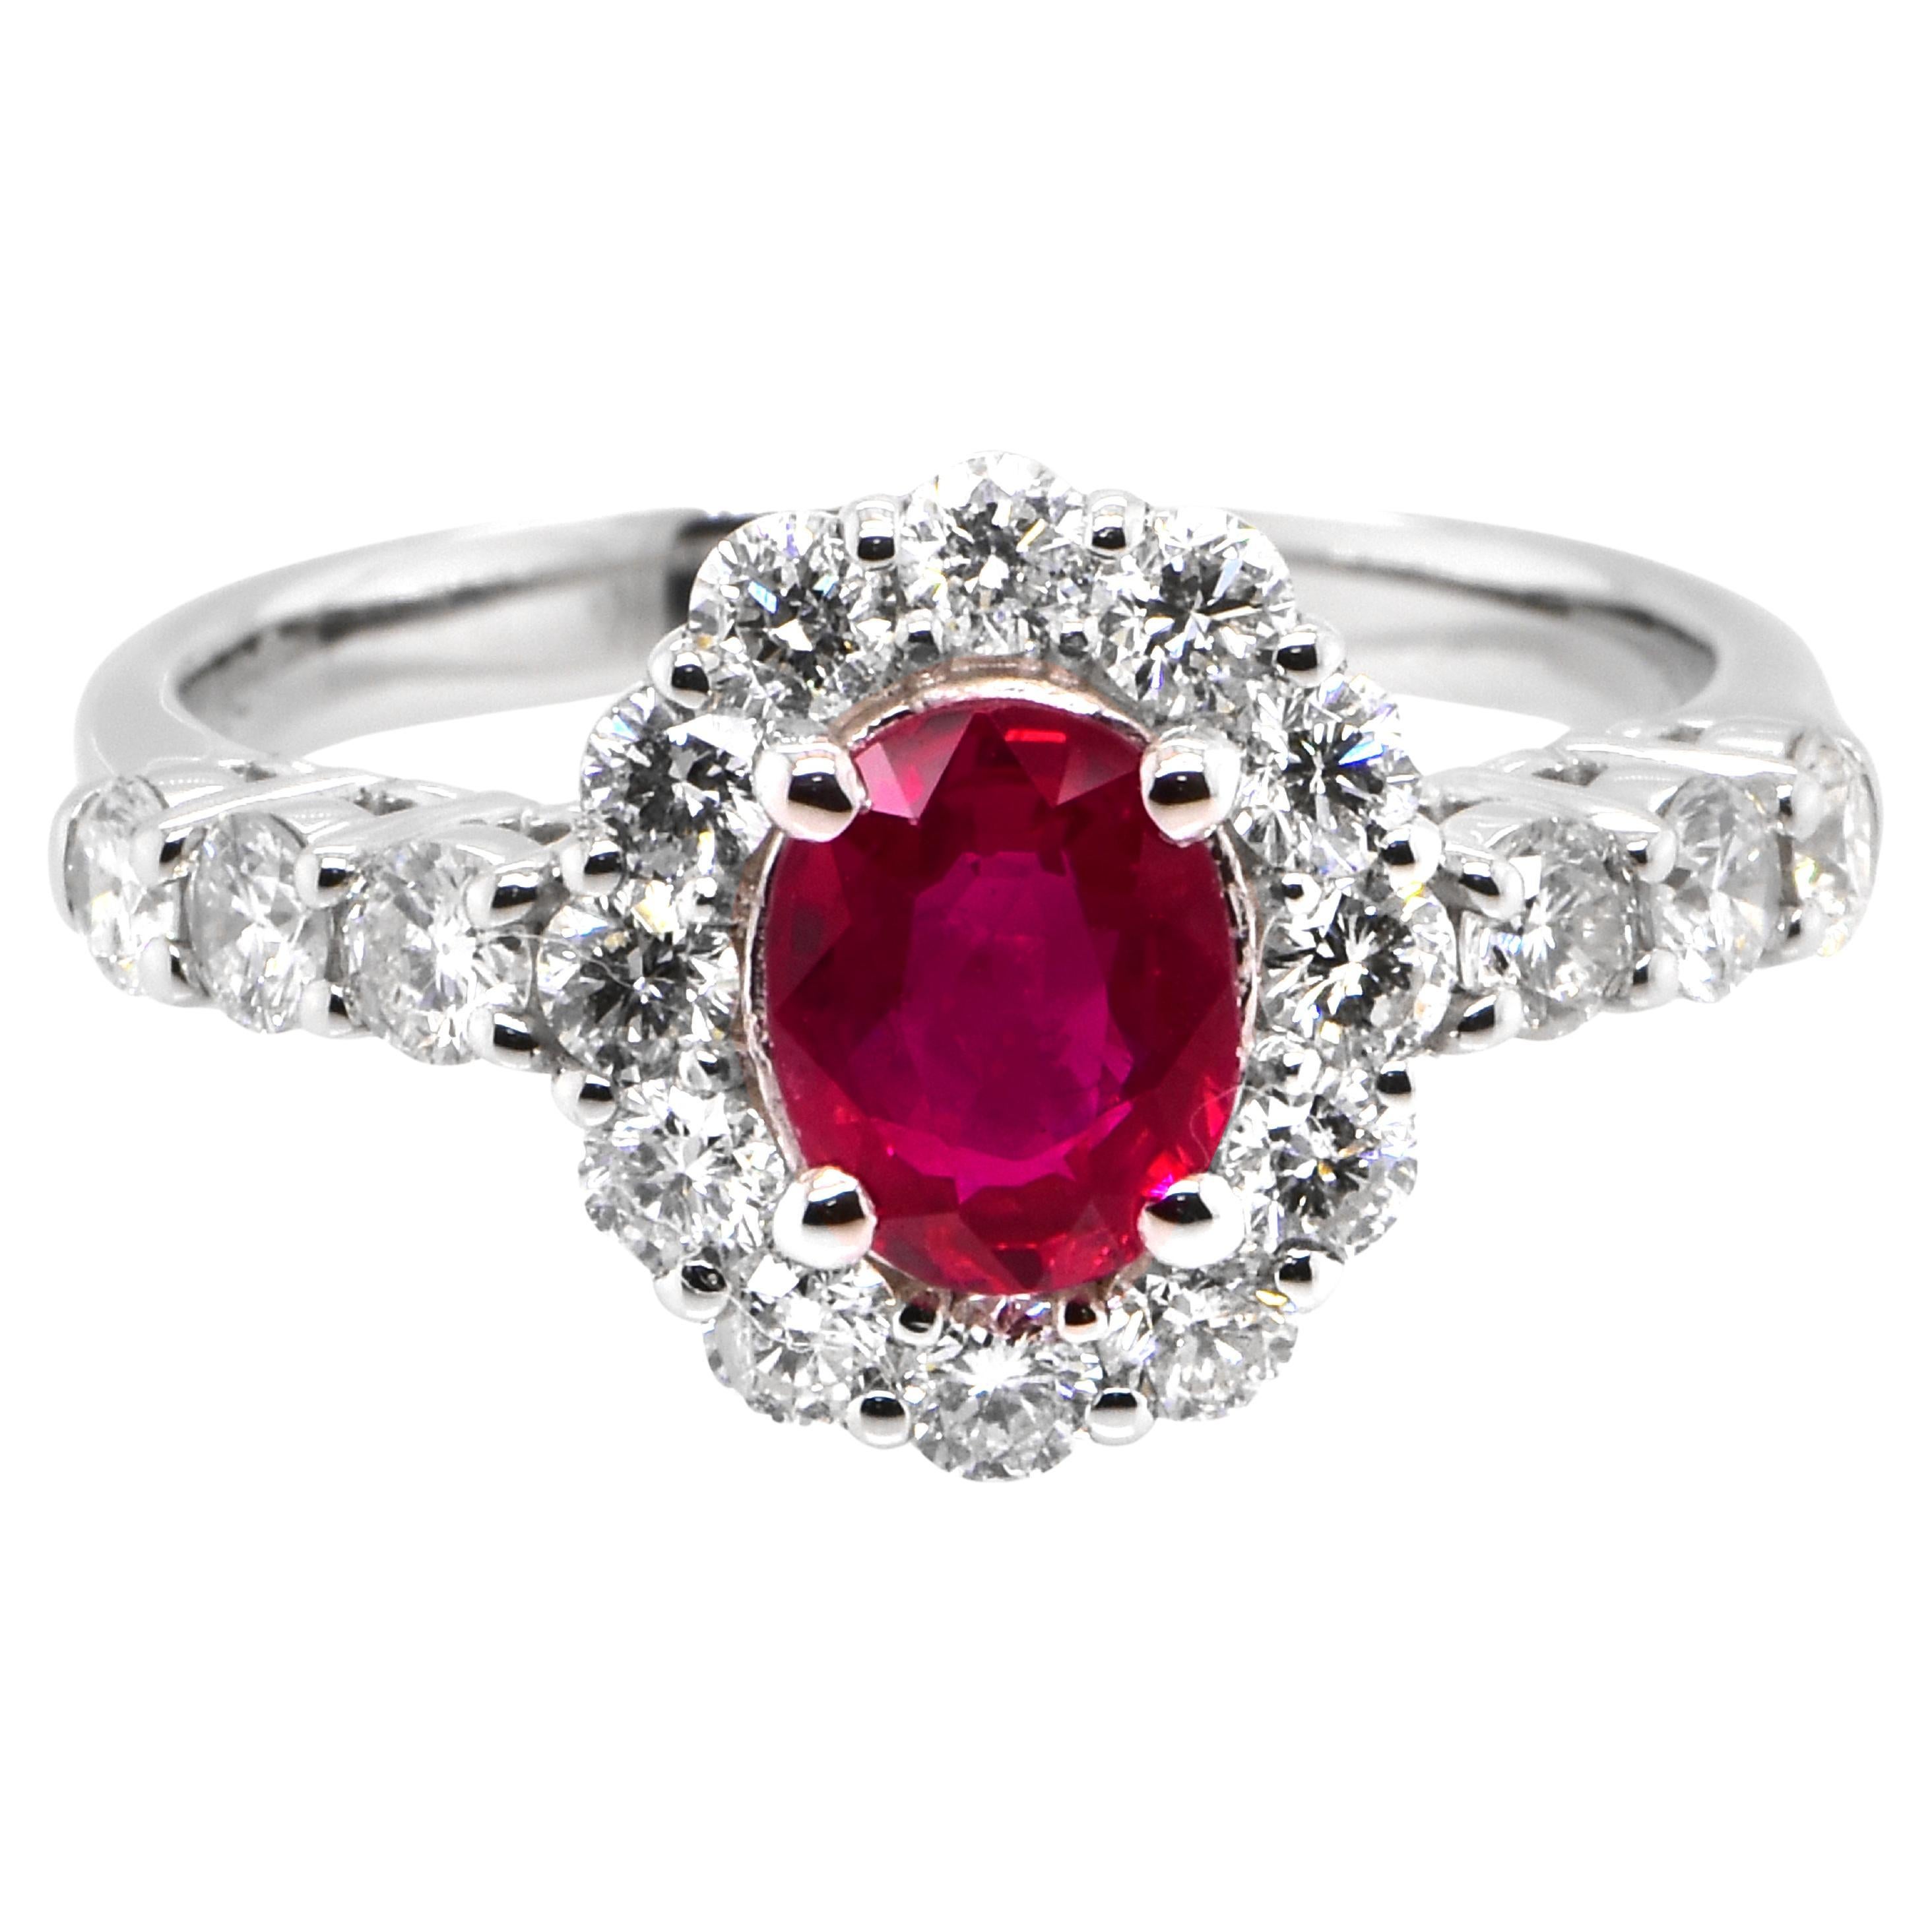 GIA Certified 1.02 Carat Burmese Origin Ruby and Diamond Ring Made in Platinum For Sale